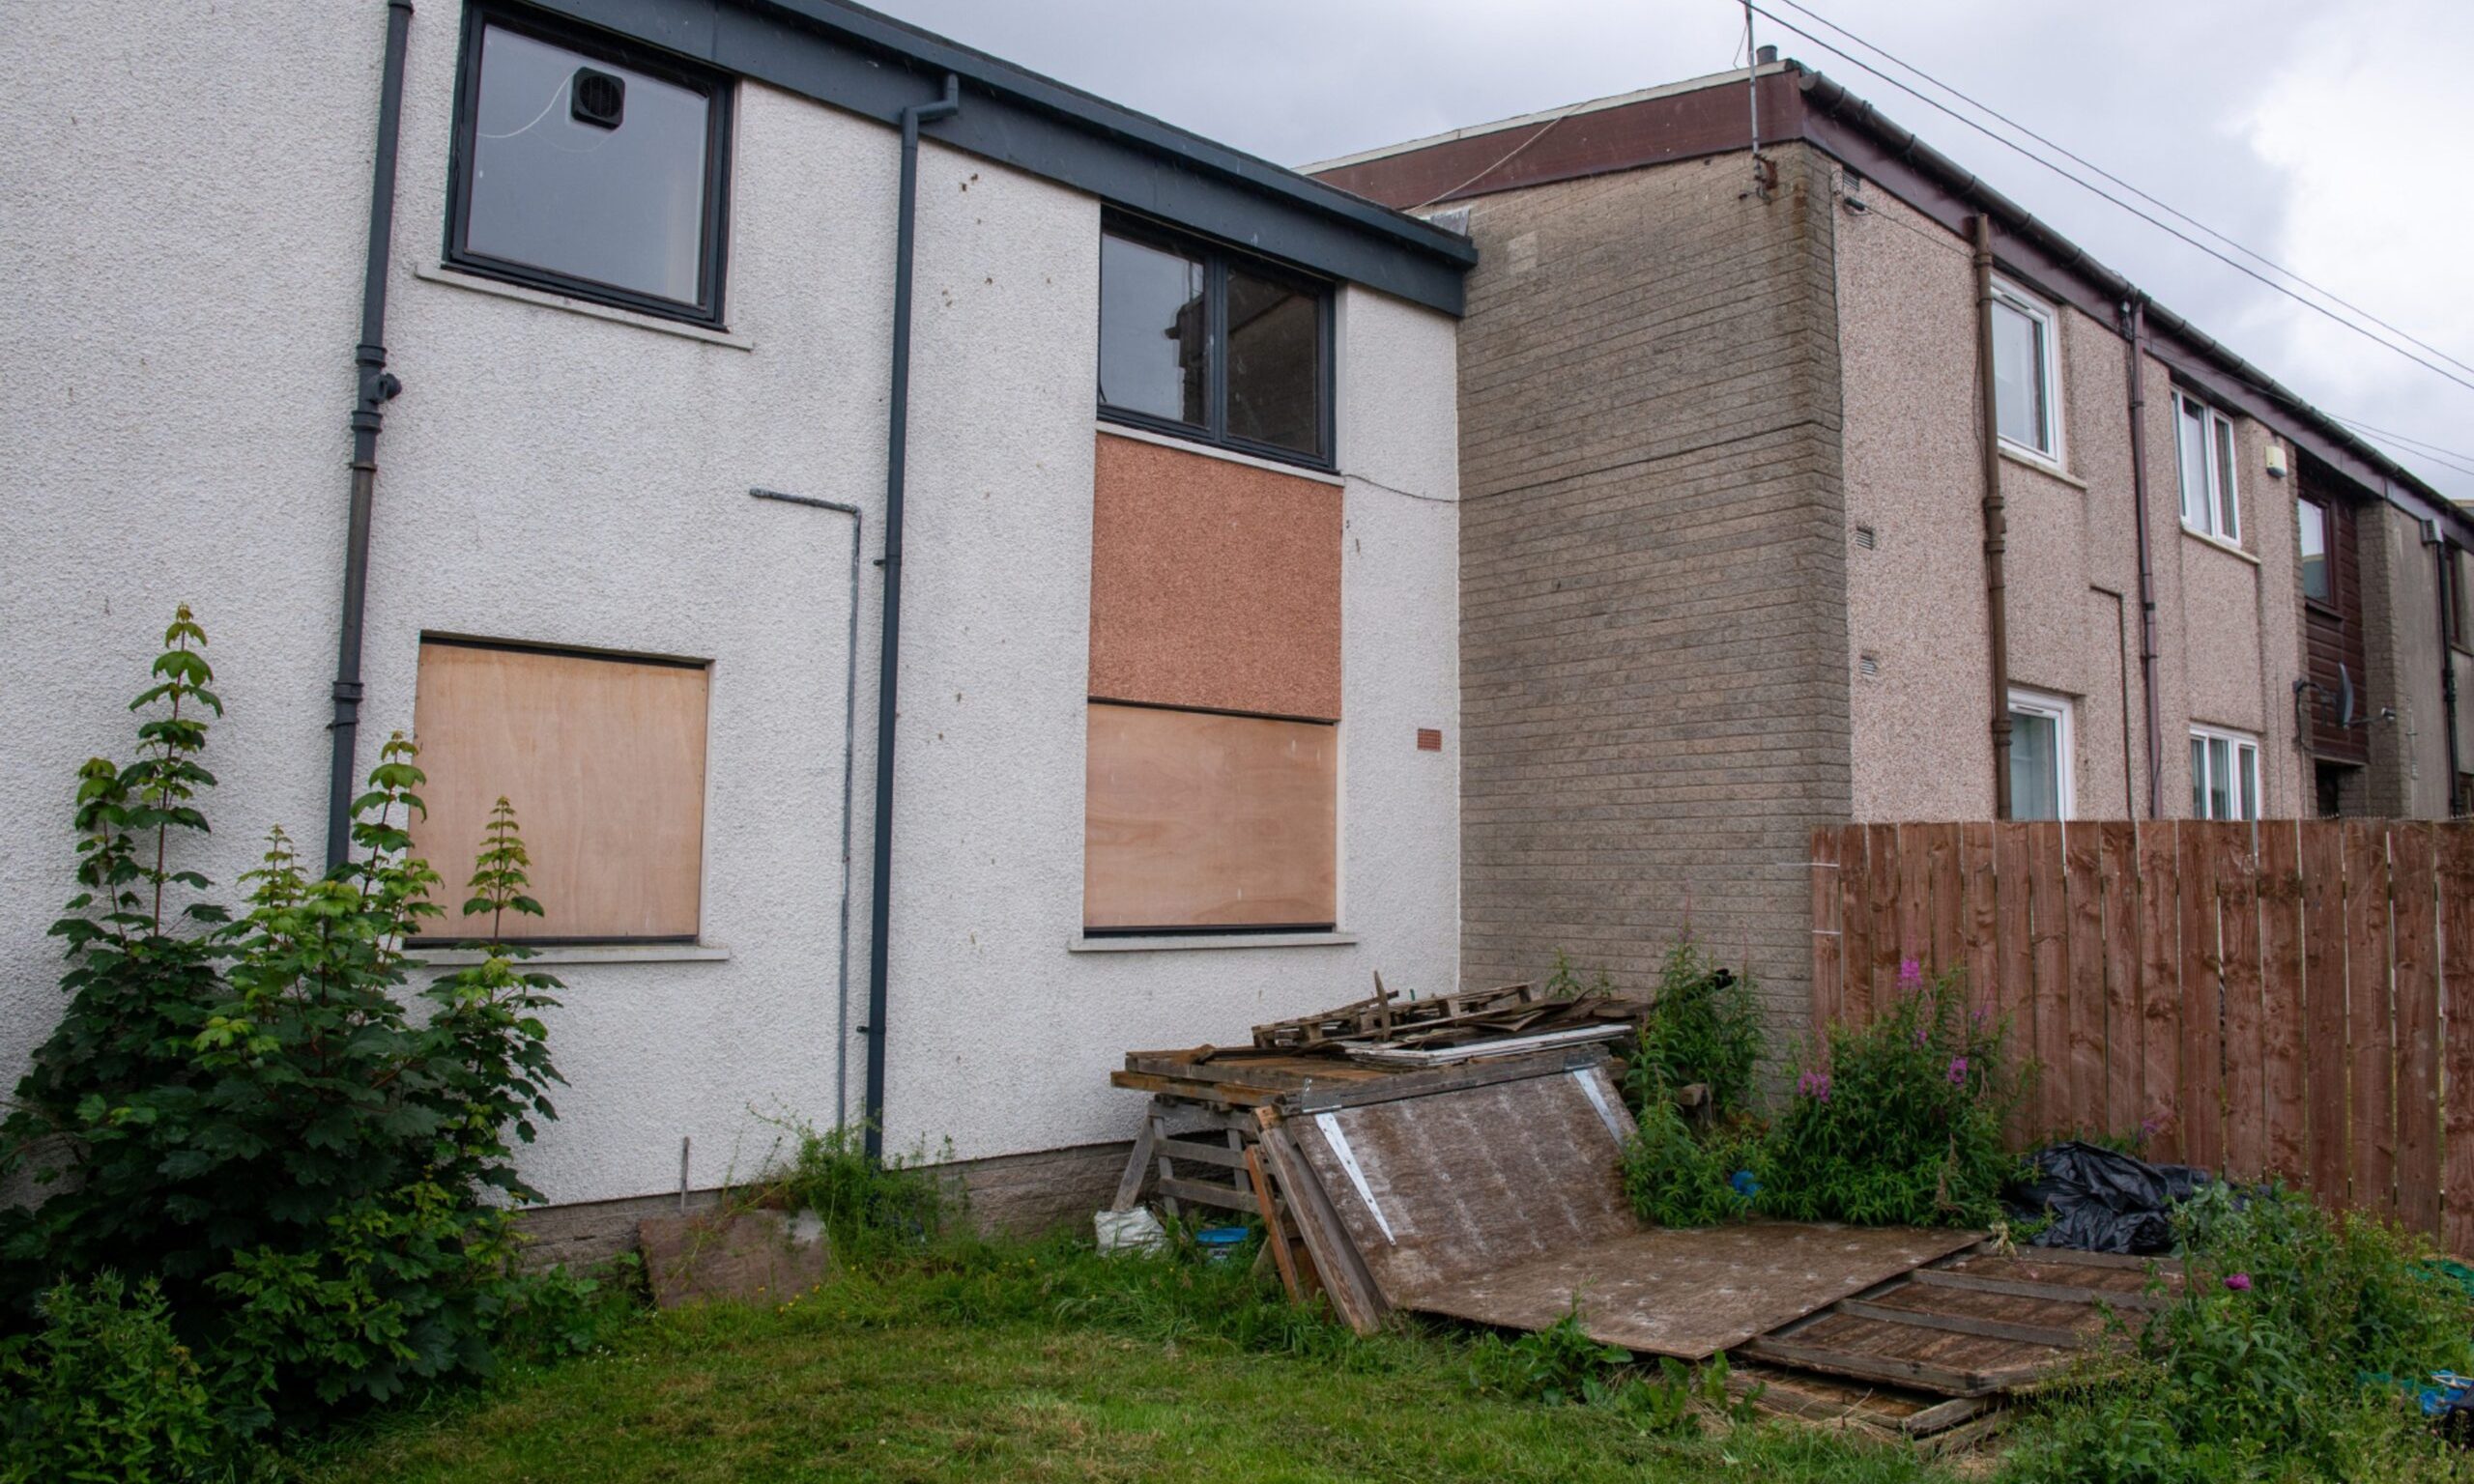 Home boarded up in Torry due to Raac.